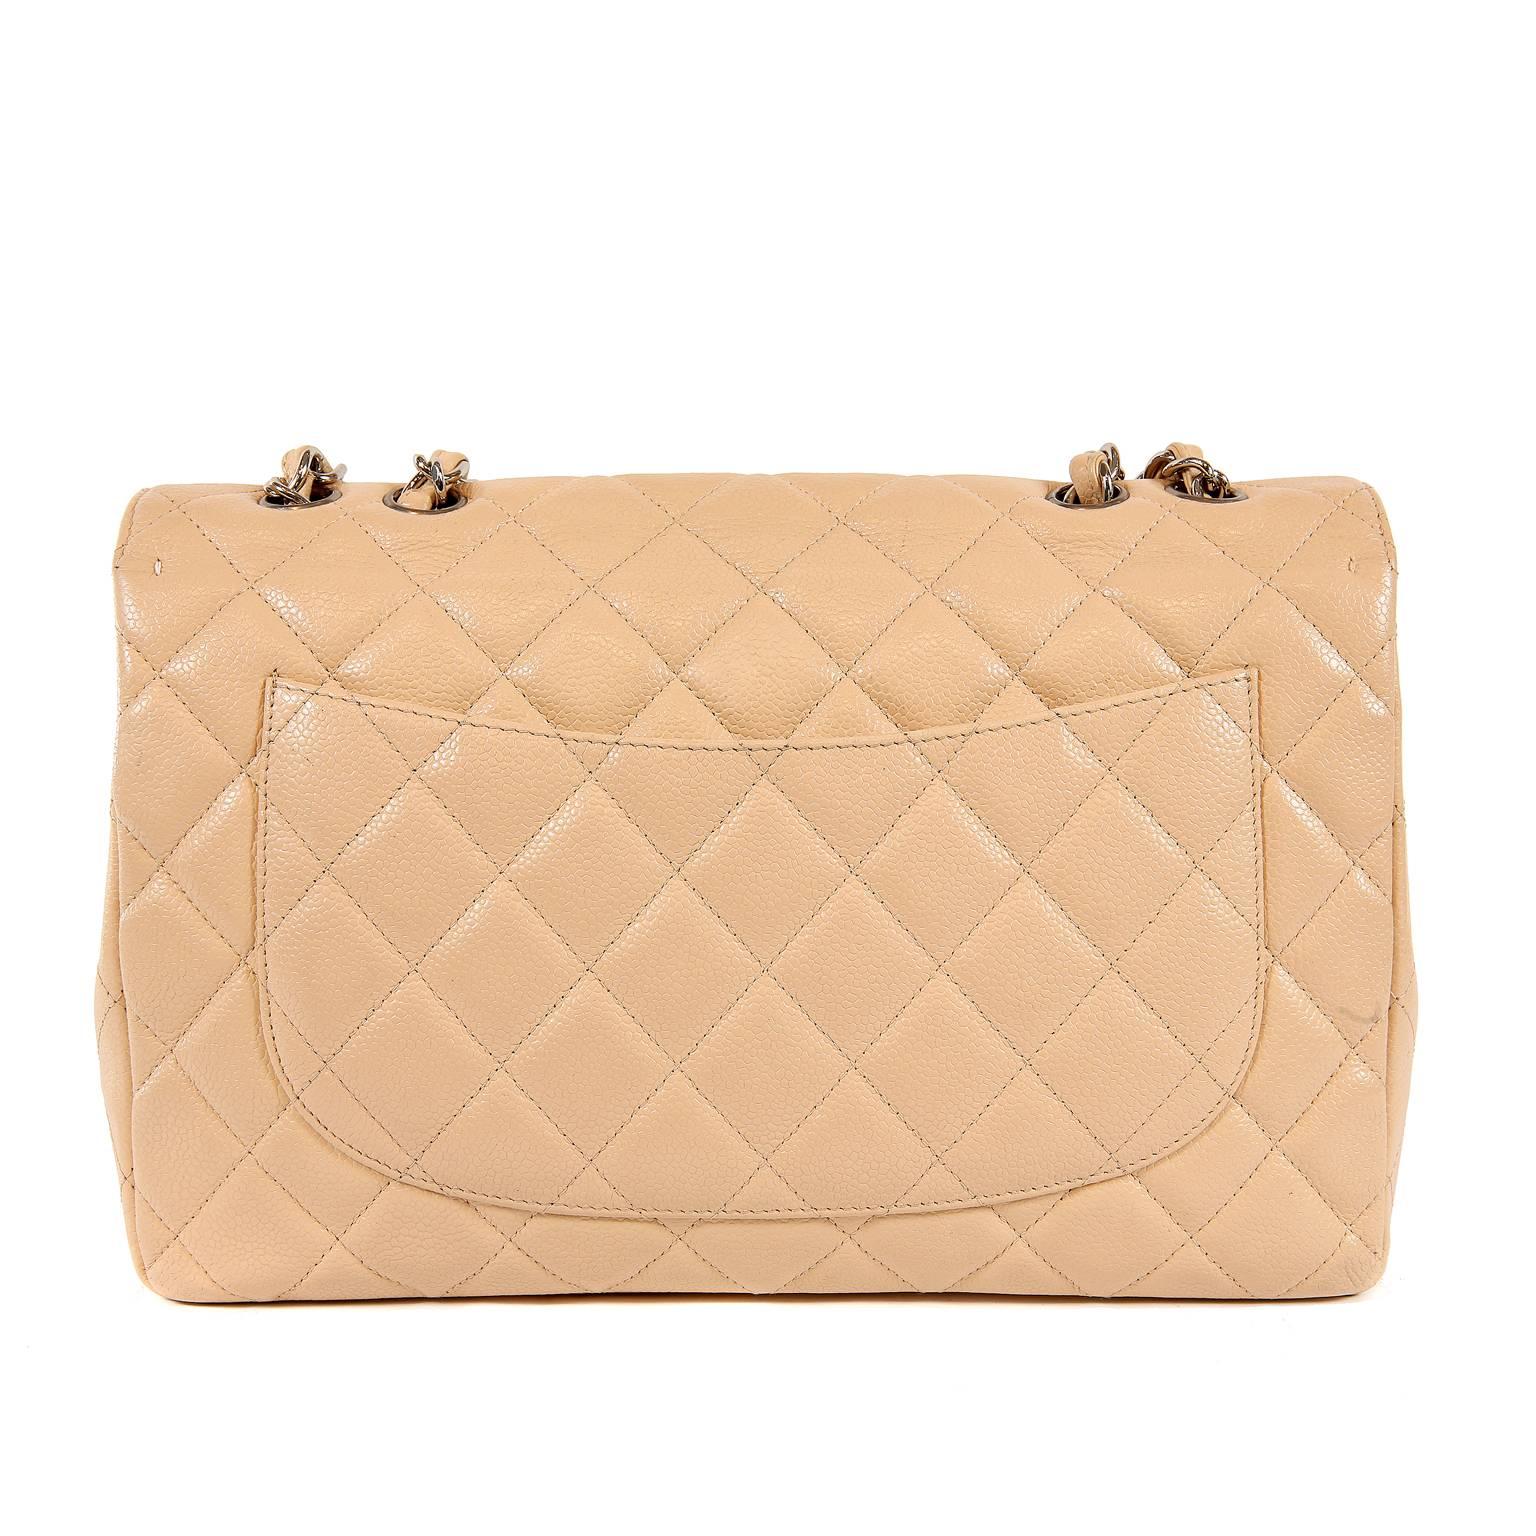 Chanel Beige Clair Caviar Jumbo Classic Flap Bag- Excellent PLUS 
Rarely seen in the single flap design, this soft light beige balances out a collection that is heavy on black bags.  
Beige Clair caviar leather is textured and durable.  Quilted in